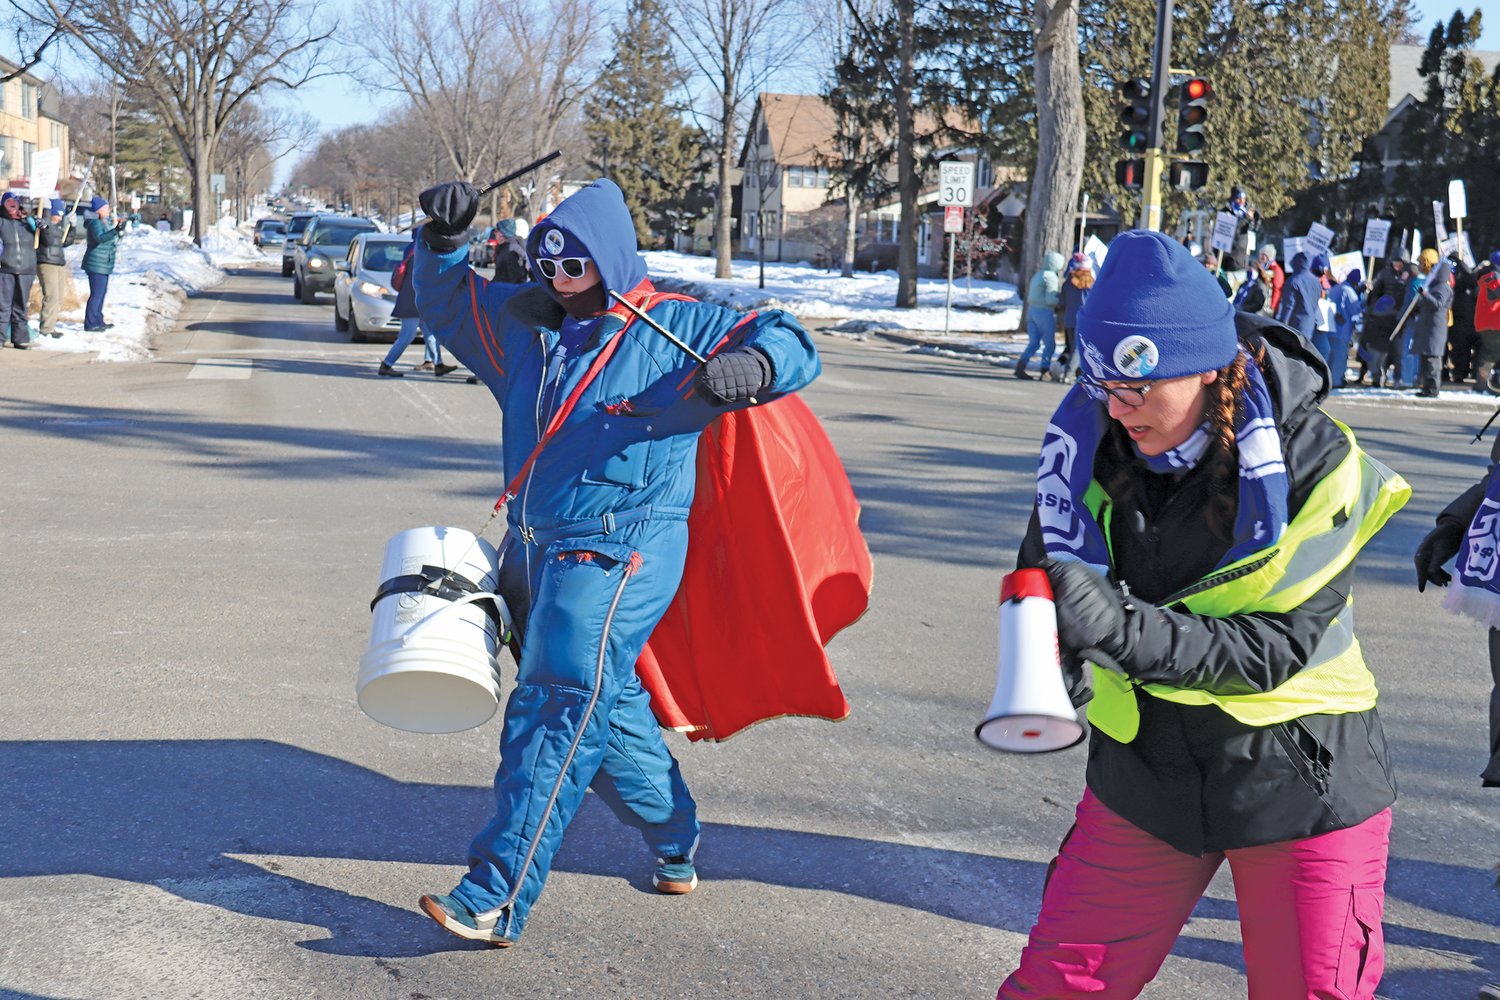 Washburn social studies teacher Cayla Baumann plays the bucket drum at Nicollet and 46th St. on March 11 on a bitterly cold day.  (Photo by Tesha M. Christensen)